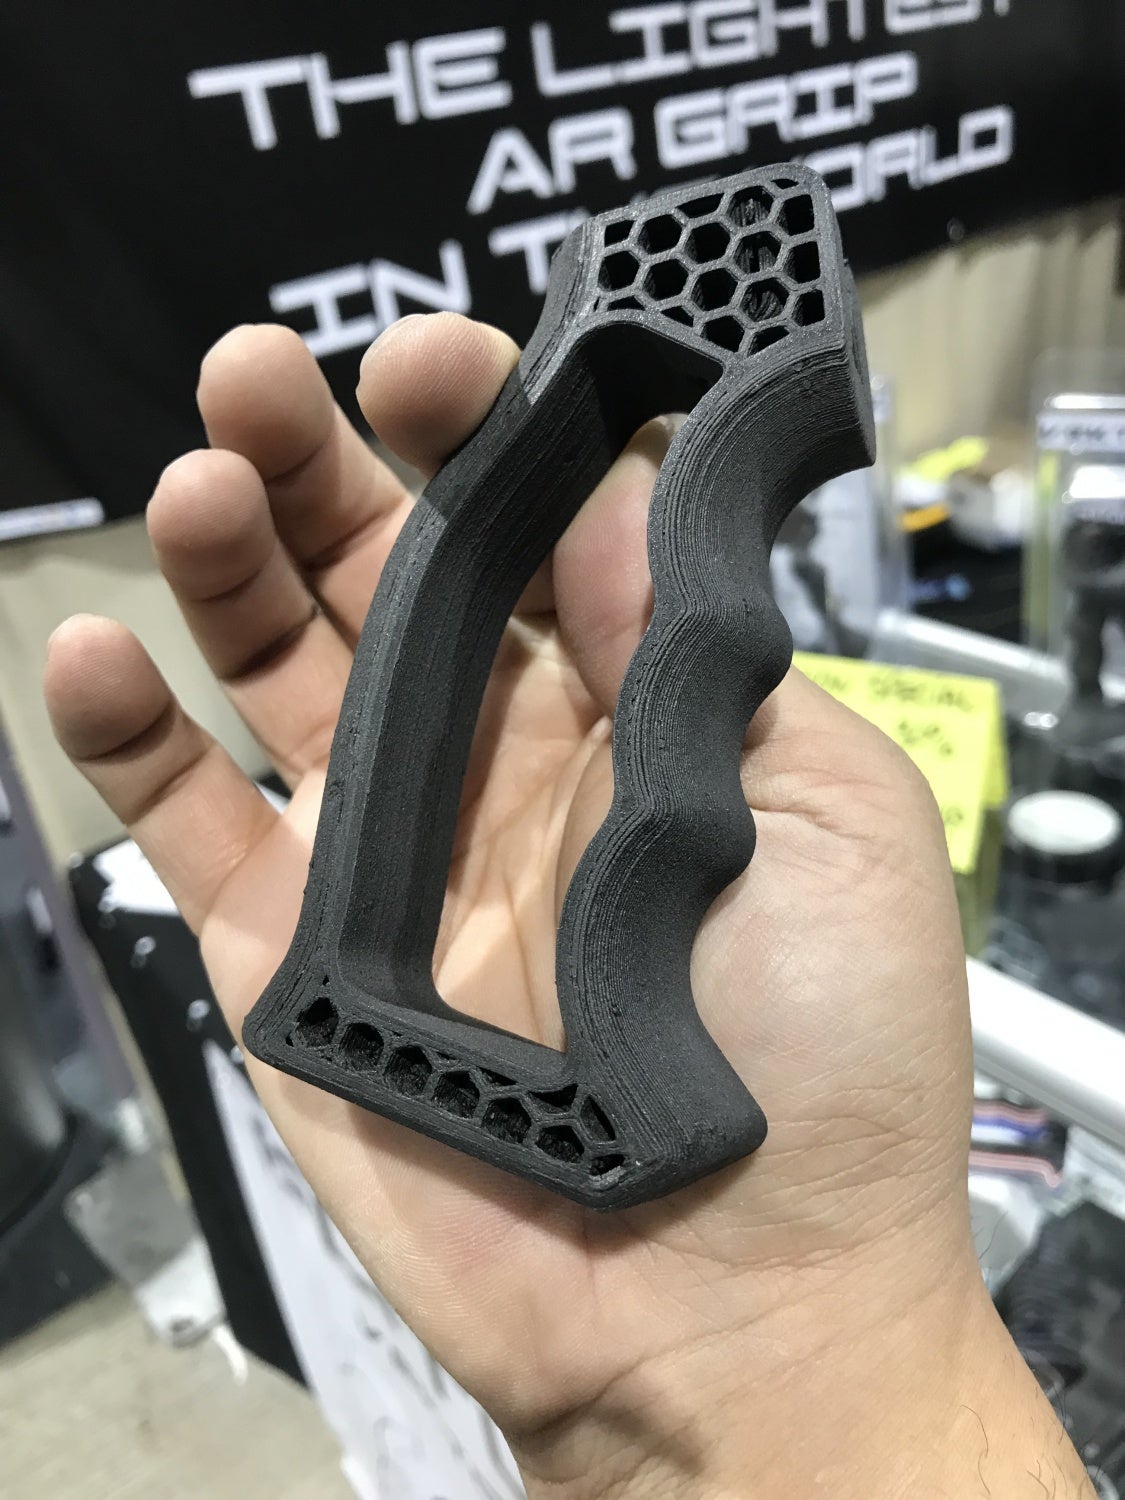 Future forged Vektor SG1 in my hand